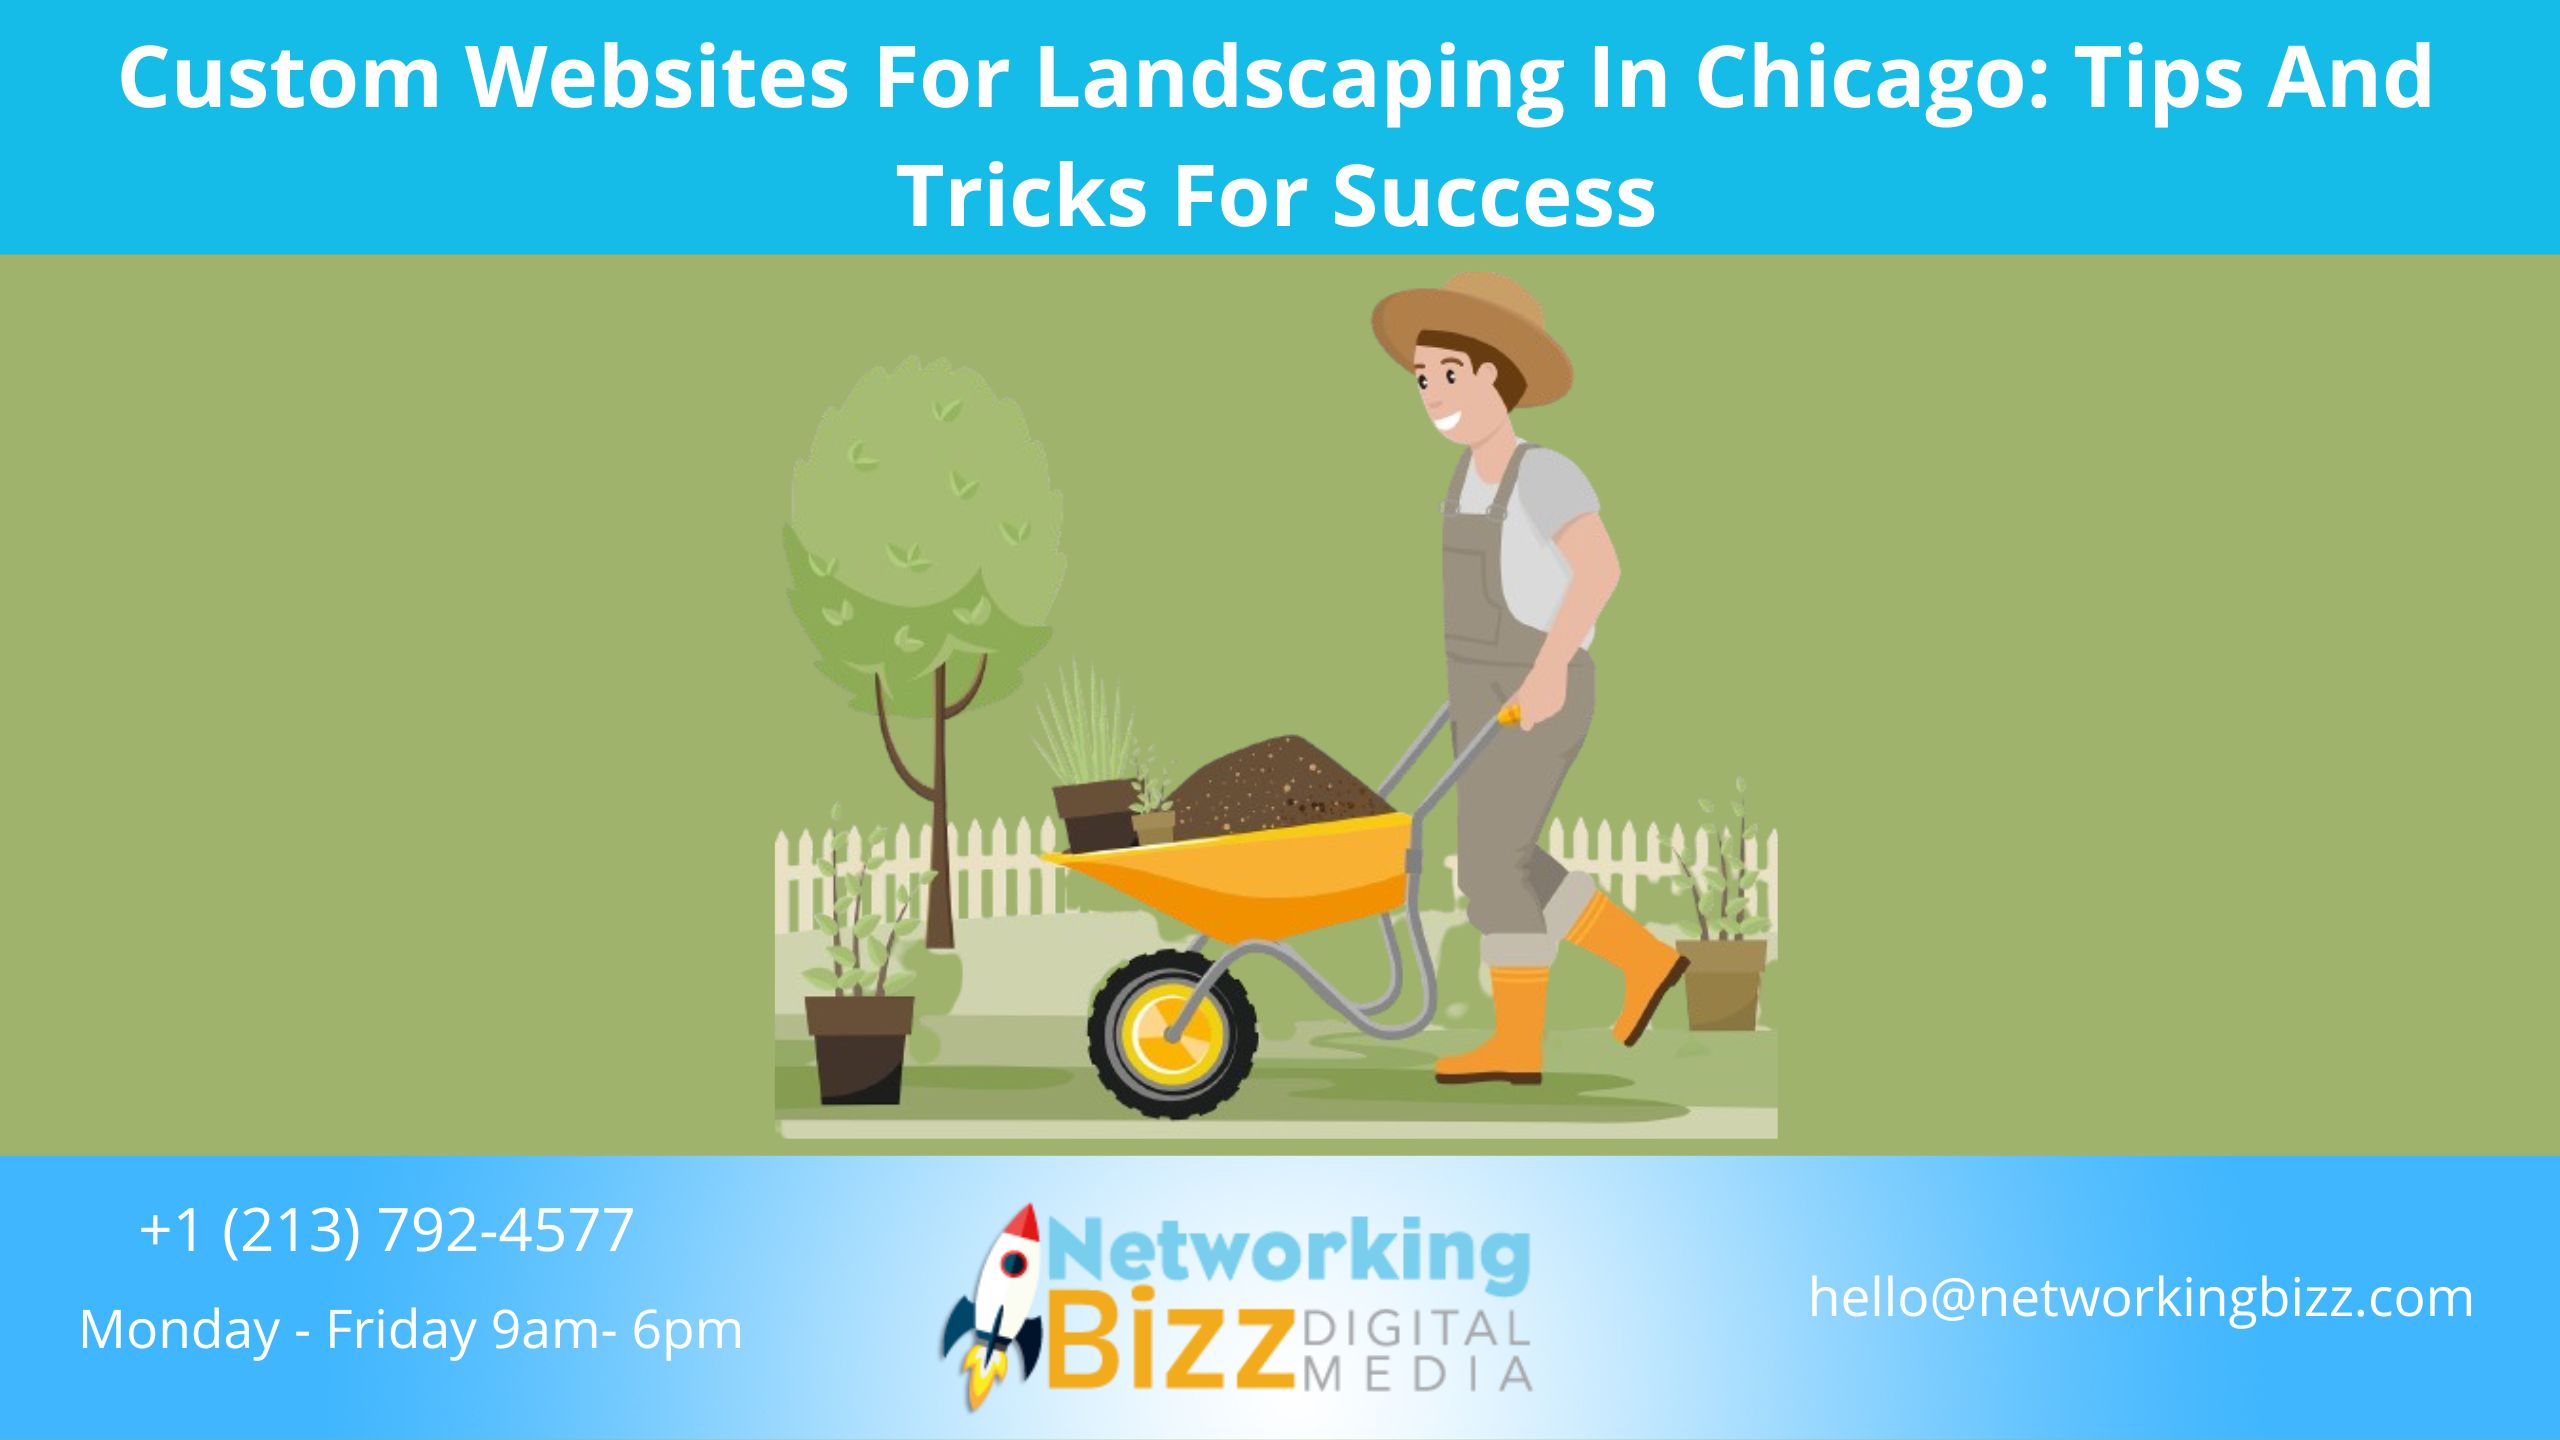 Custom Websites For Landscaping In Chicago: Tips And Tricks For Success